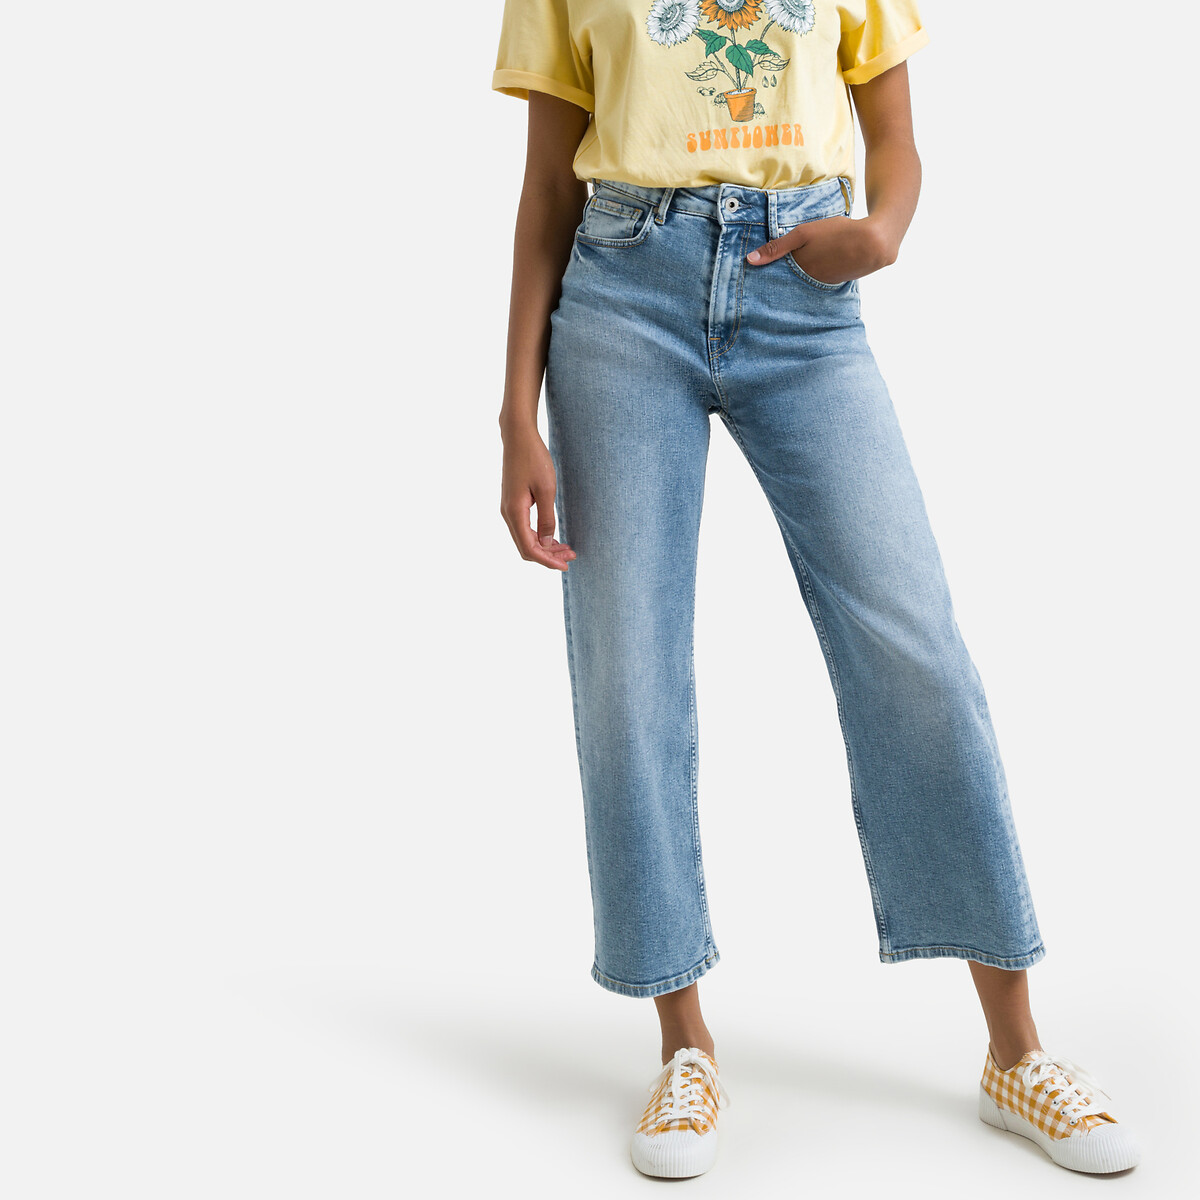 Lexa sky high jeans with wide leg and high waist Pepe Jeans | La Redoute